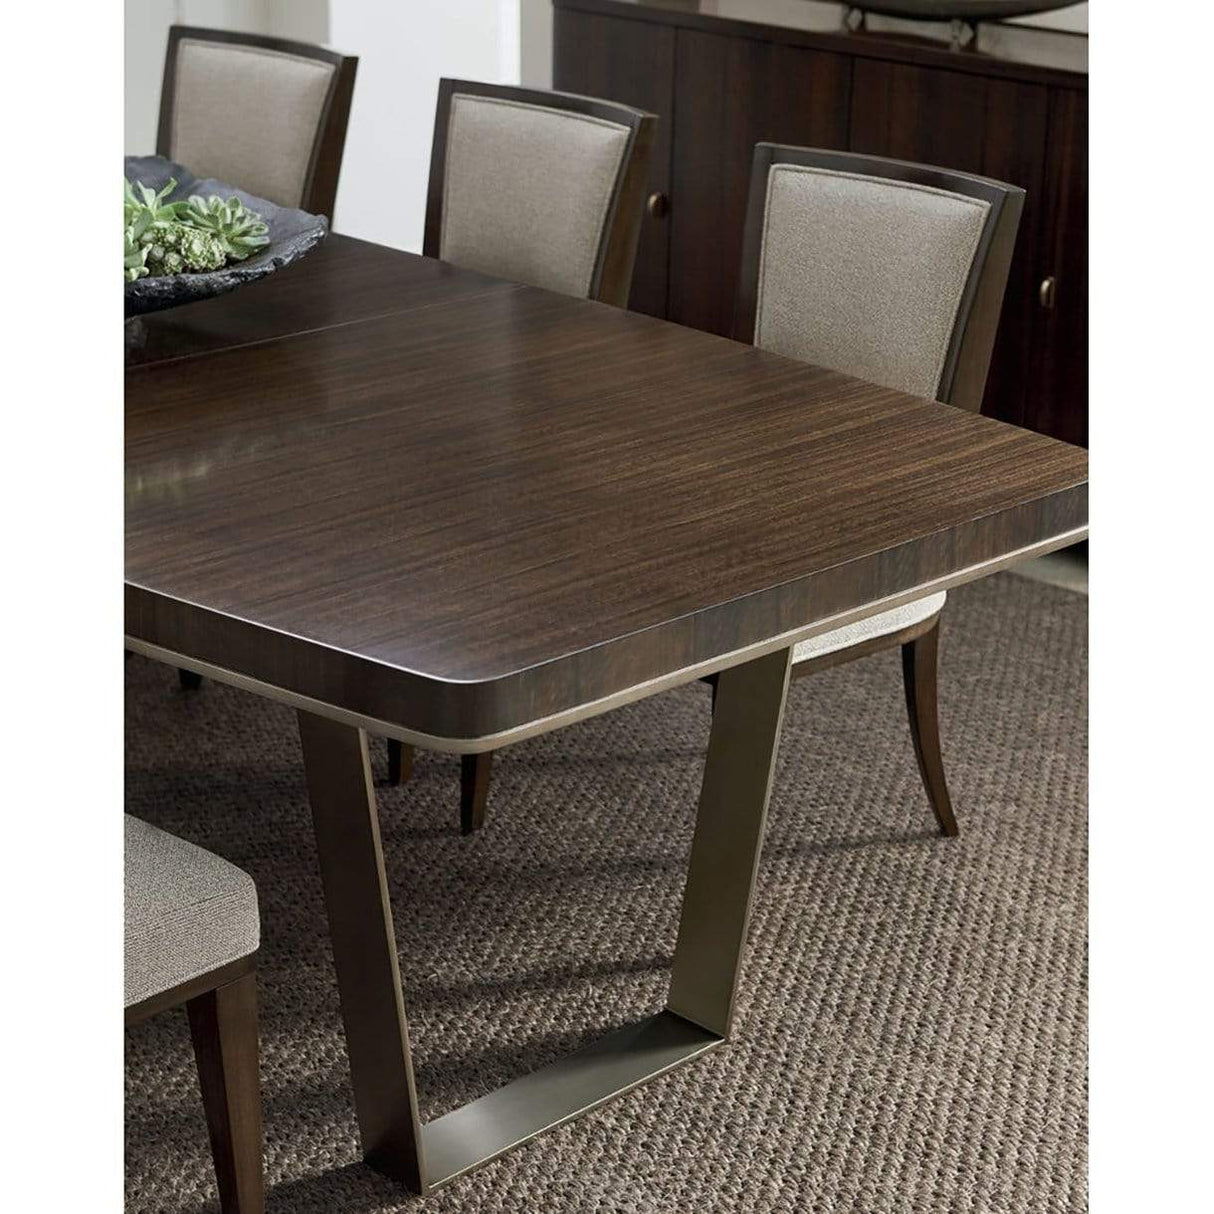 Caracole Streamline Dining Table Furniture caracole-M022-417-201 00662896020861